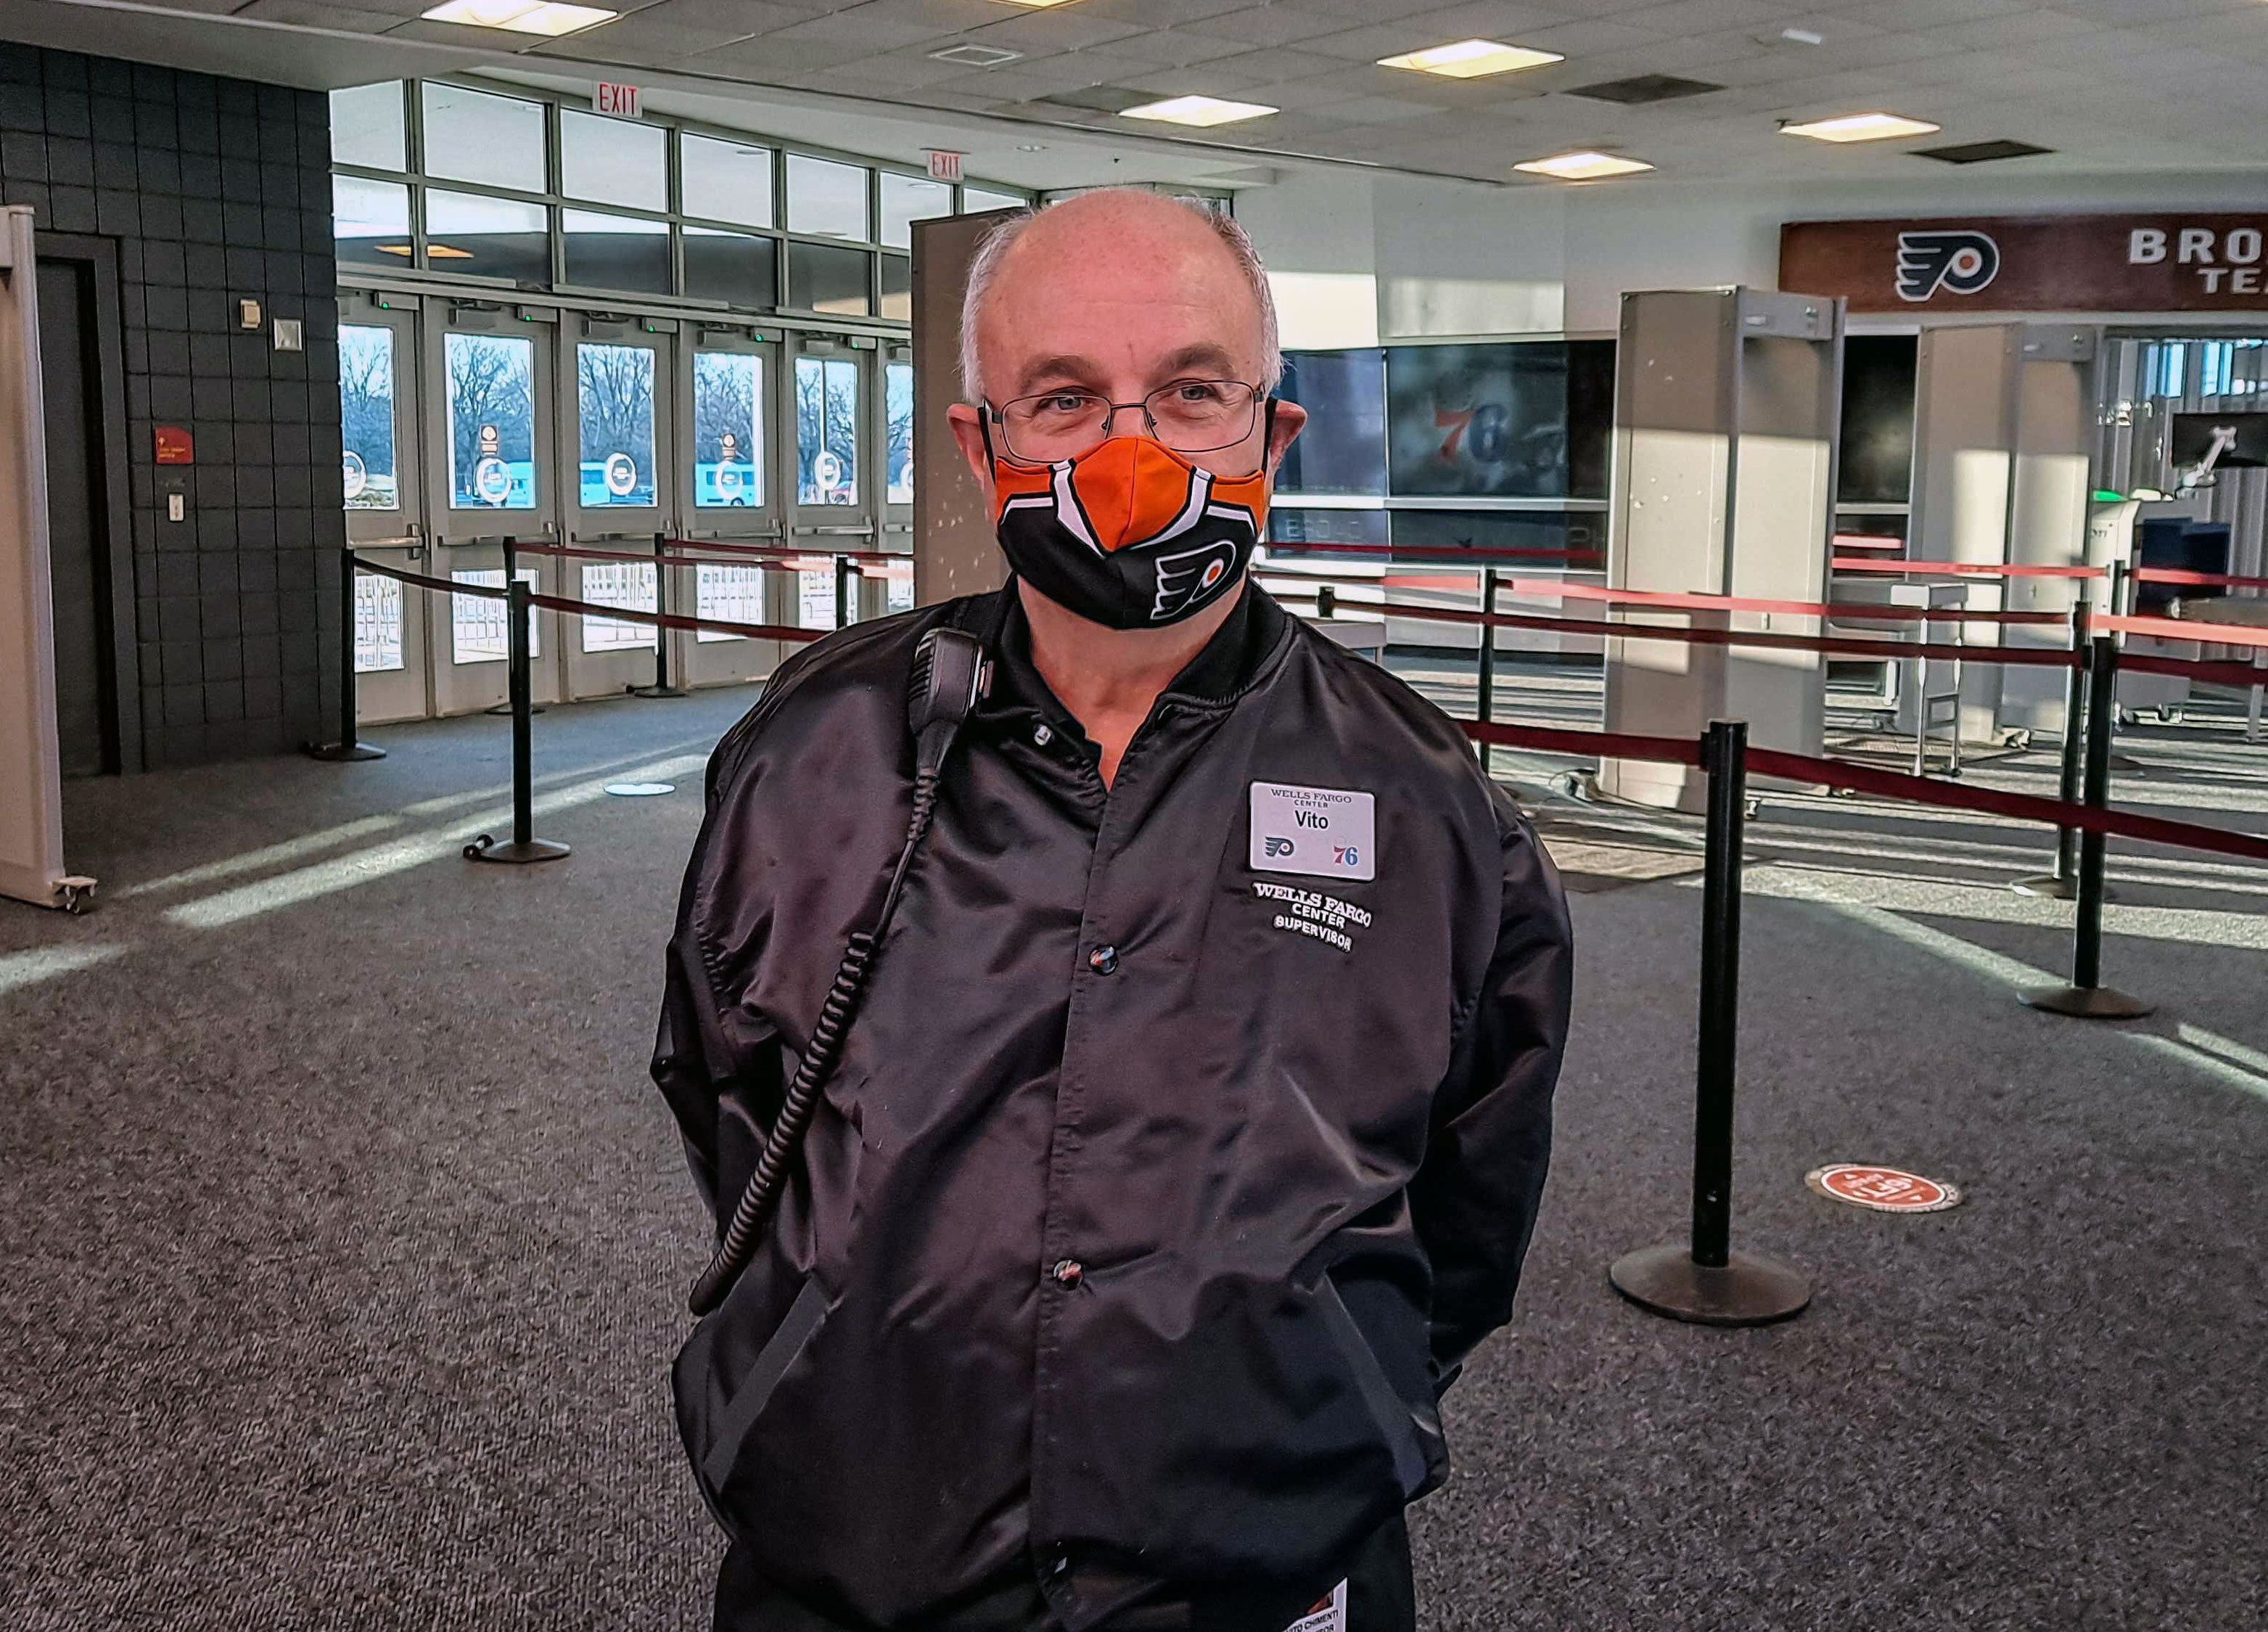 Vito Chimenti, wearing a face mask, stands inside Wells Fargo Center